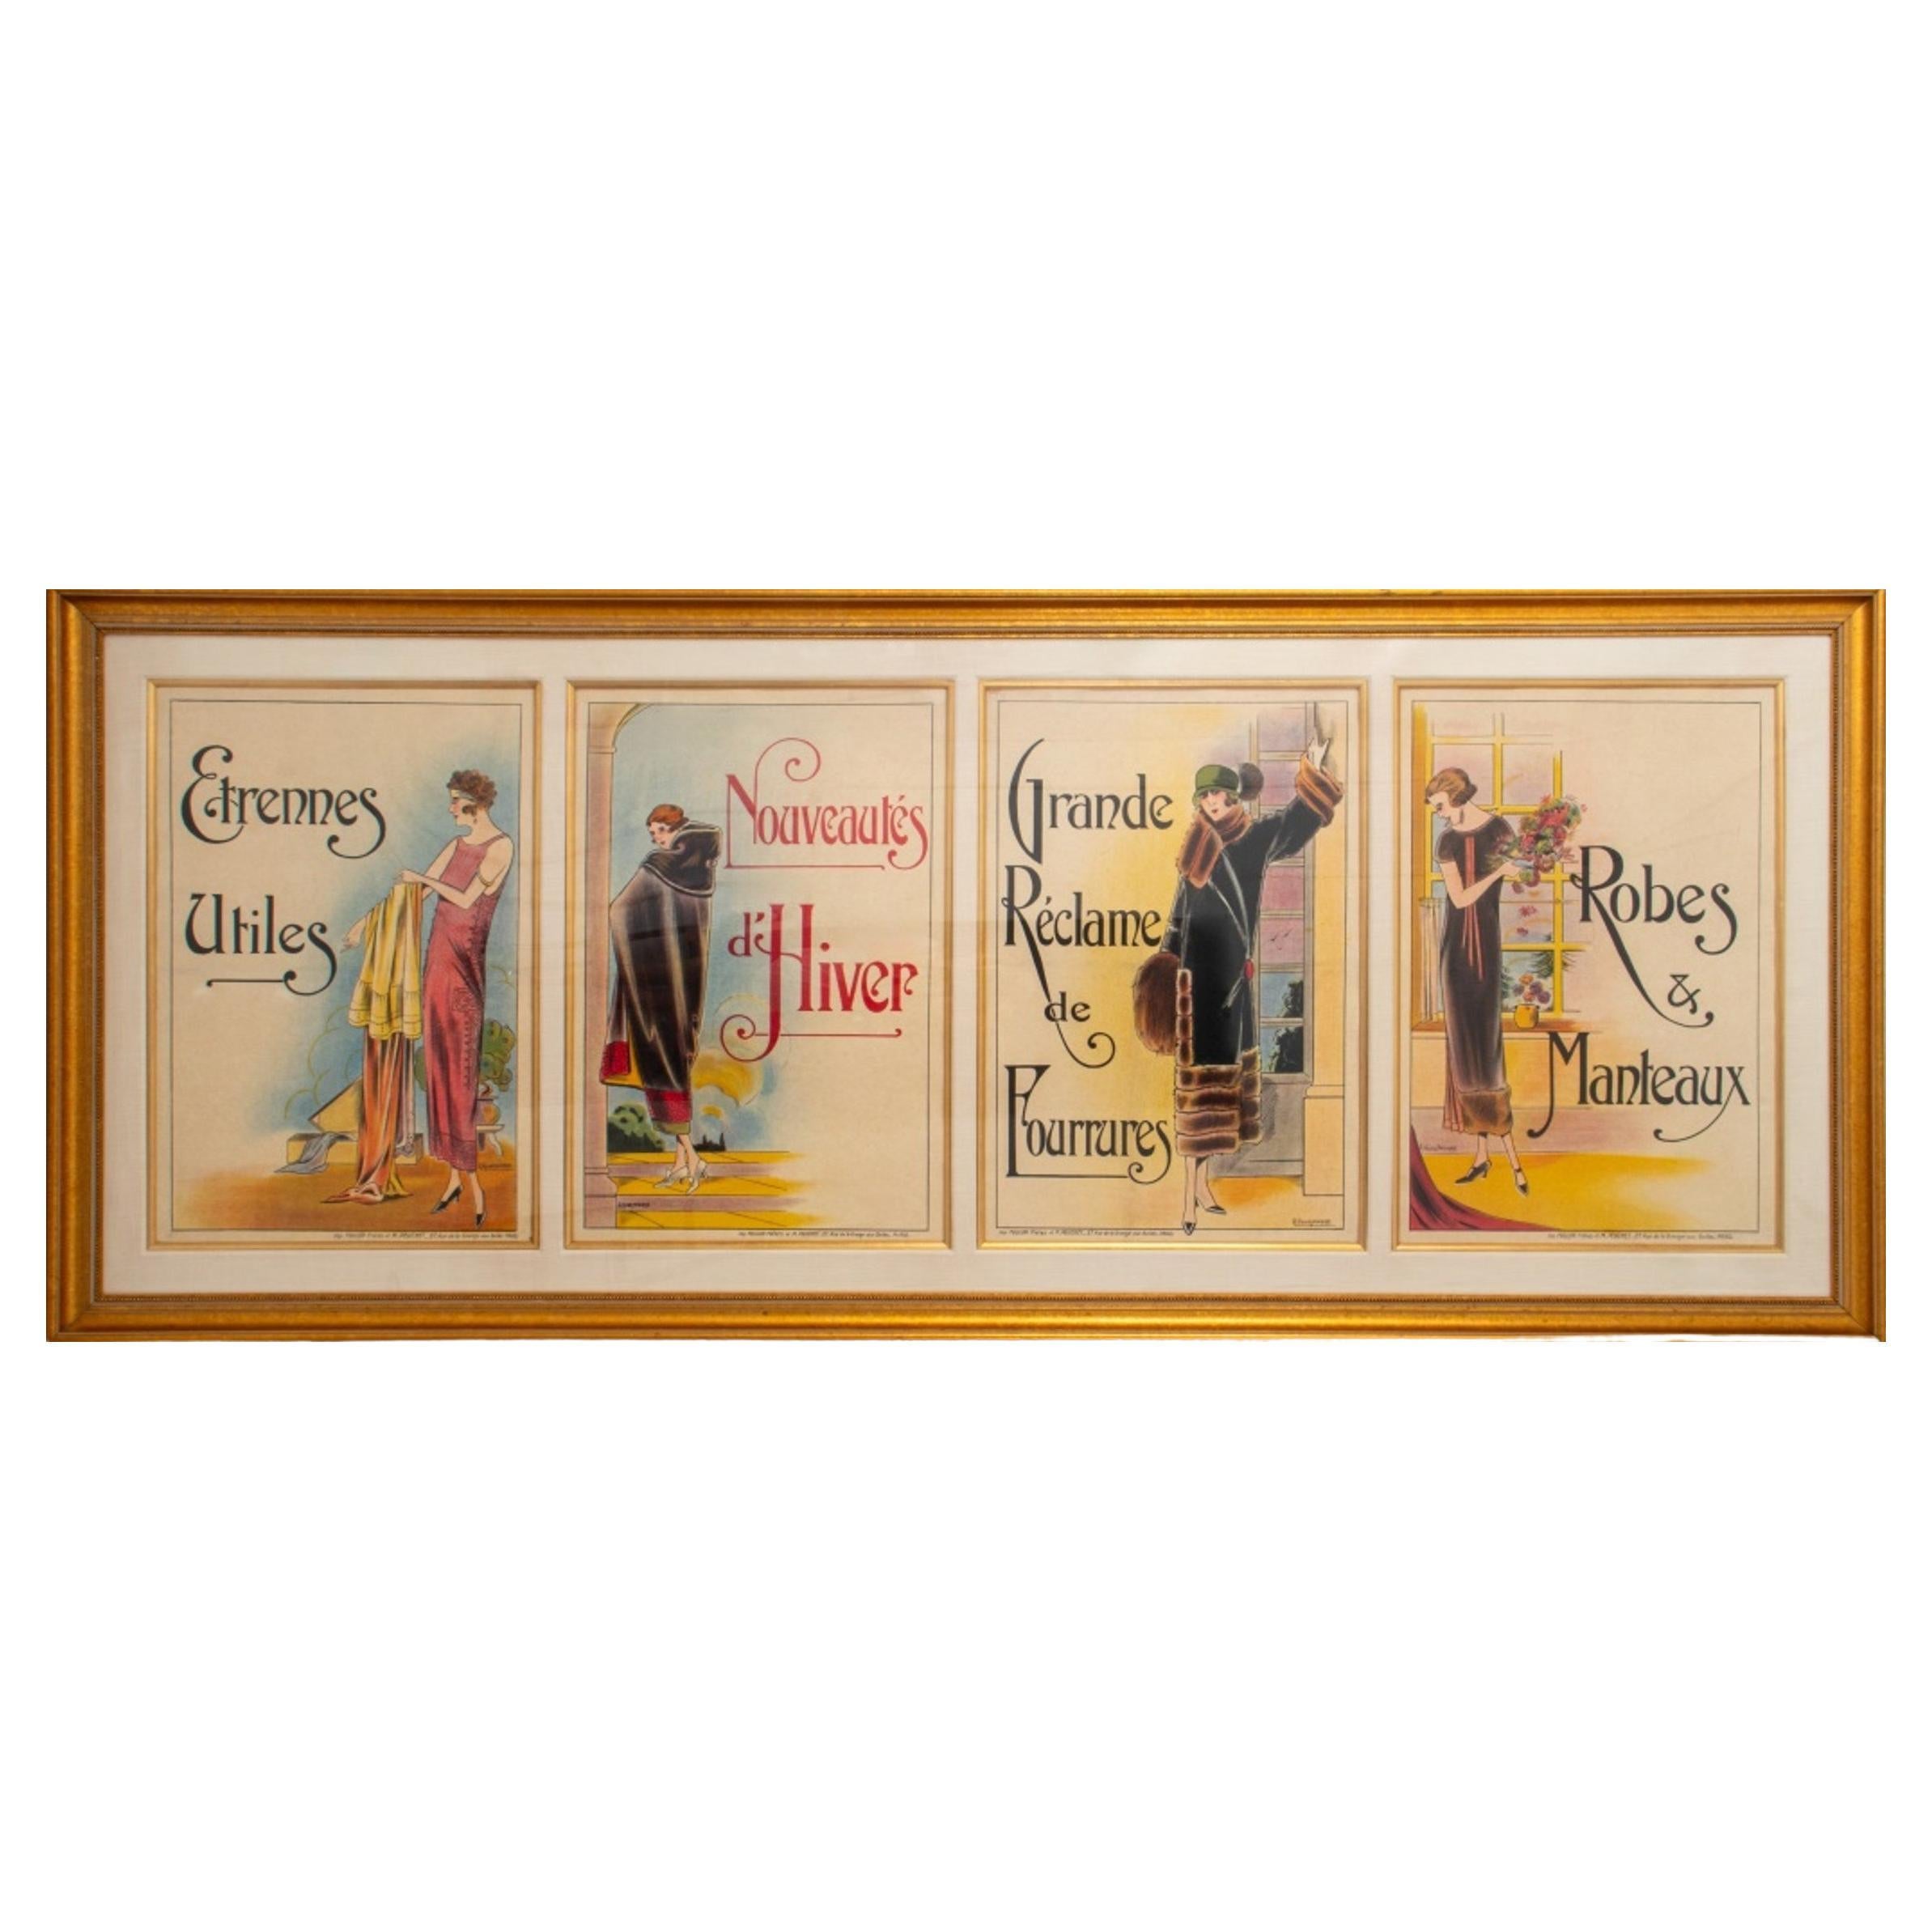 Set of Four French Art Deco Fashion Posters